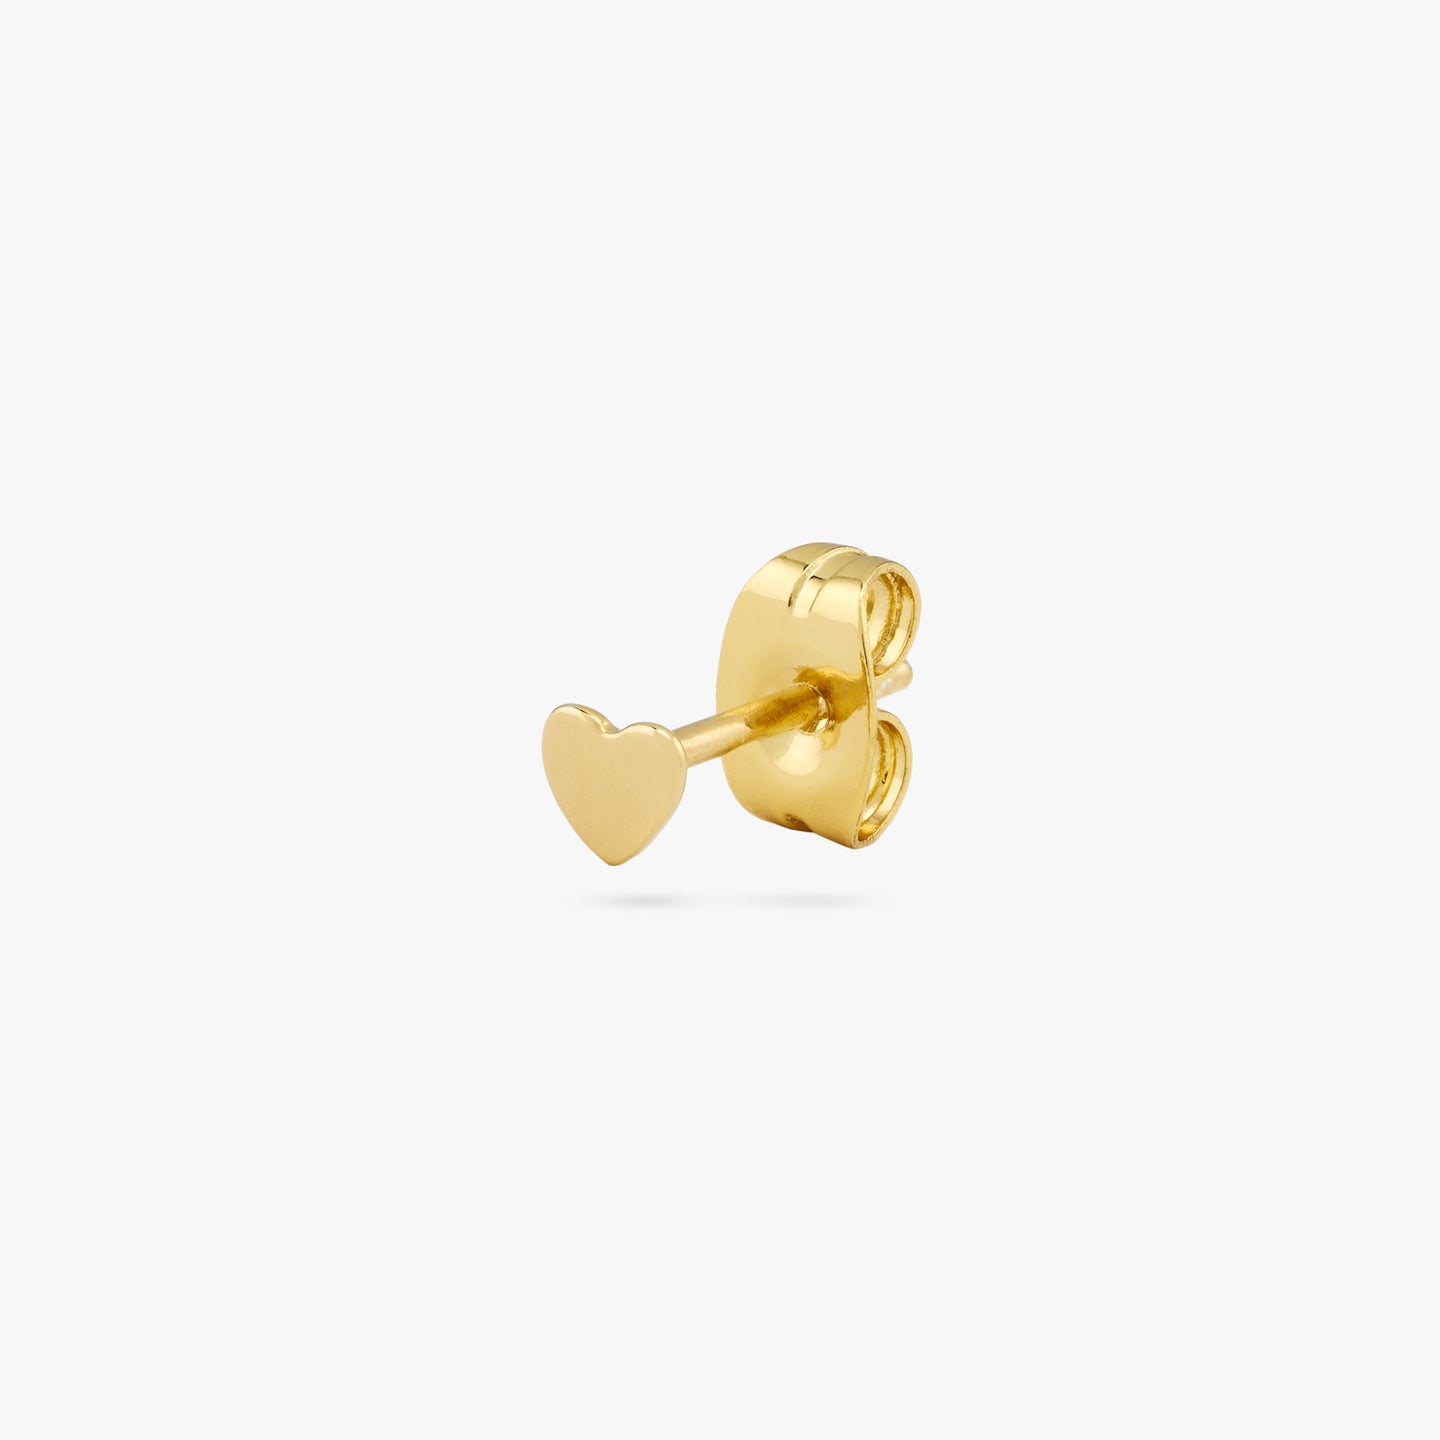 This is a small gold stud in the shape of a heart color:null|gold